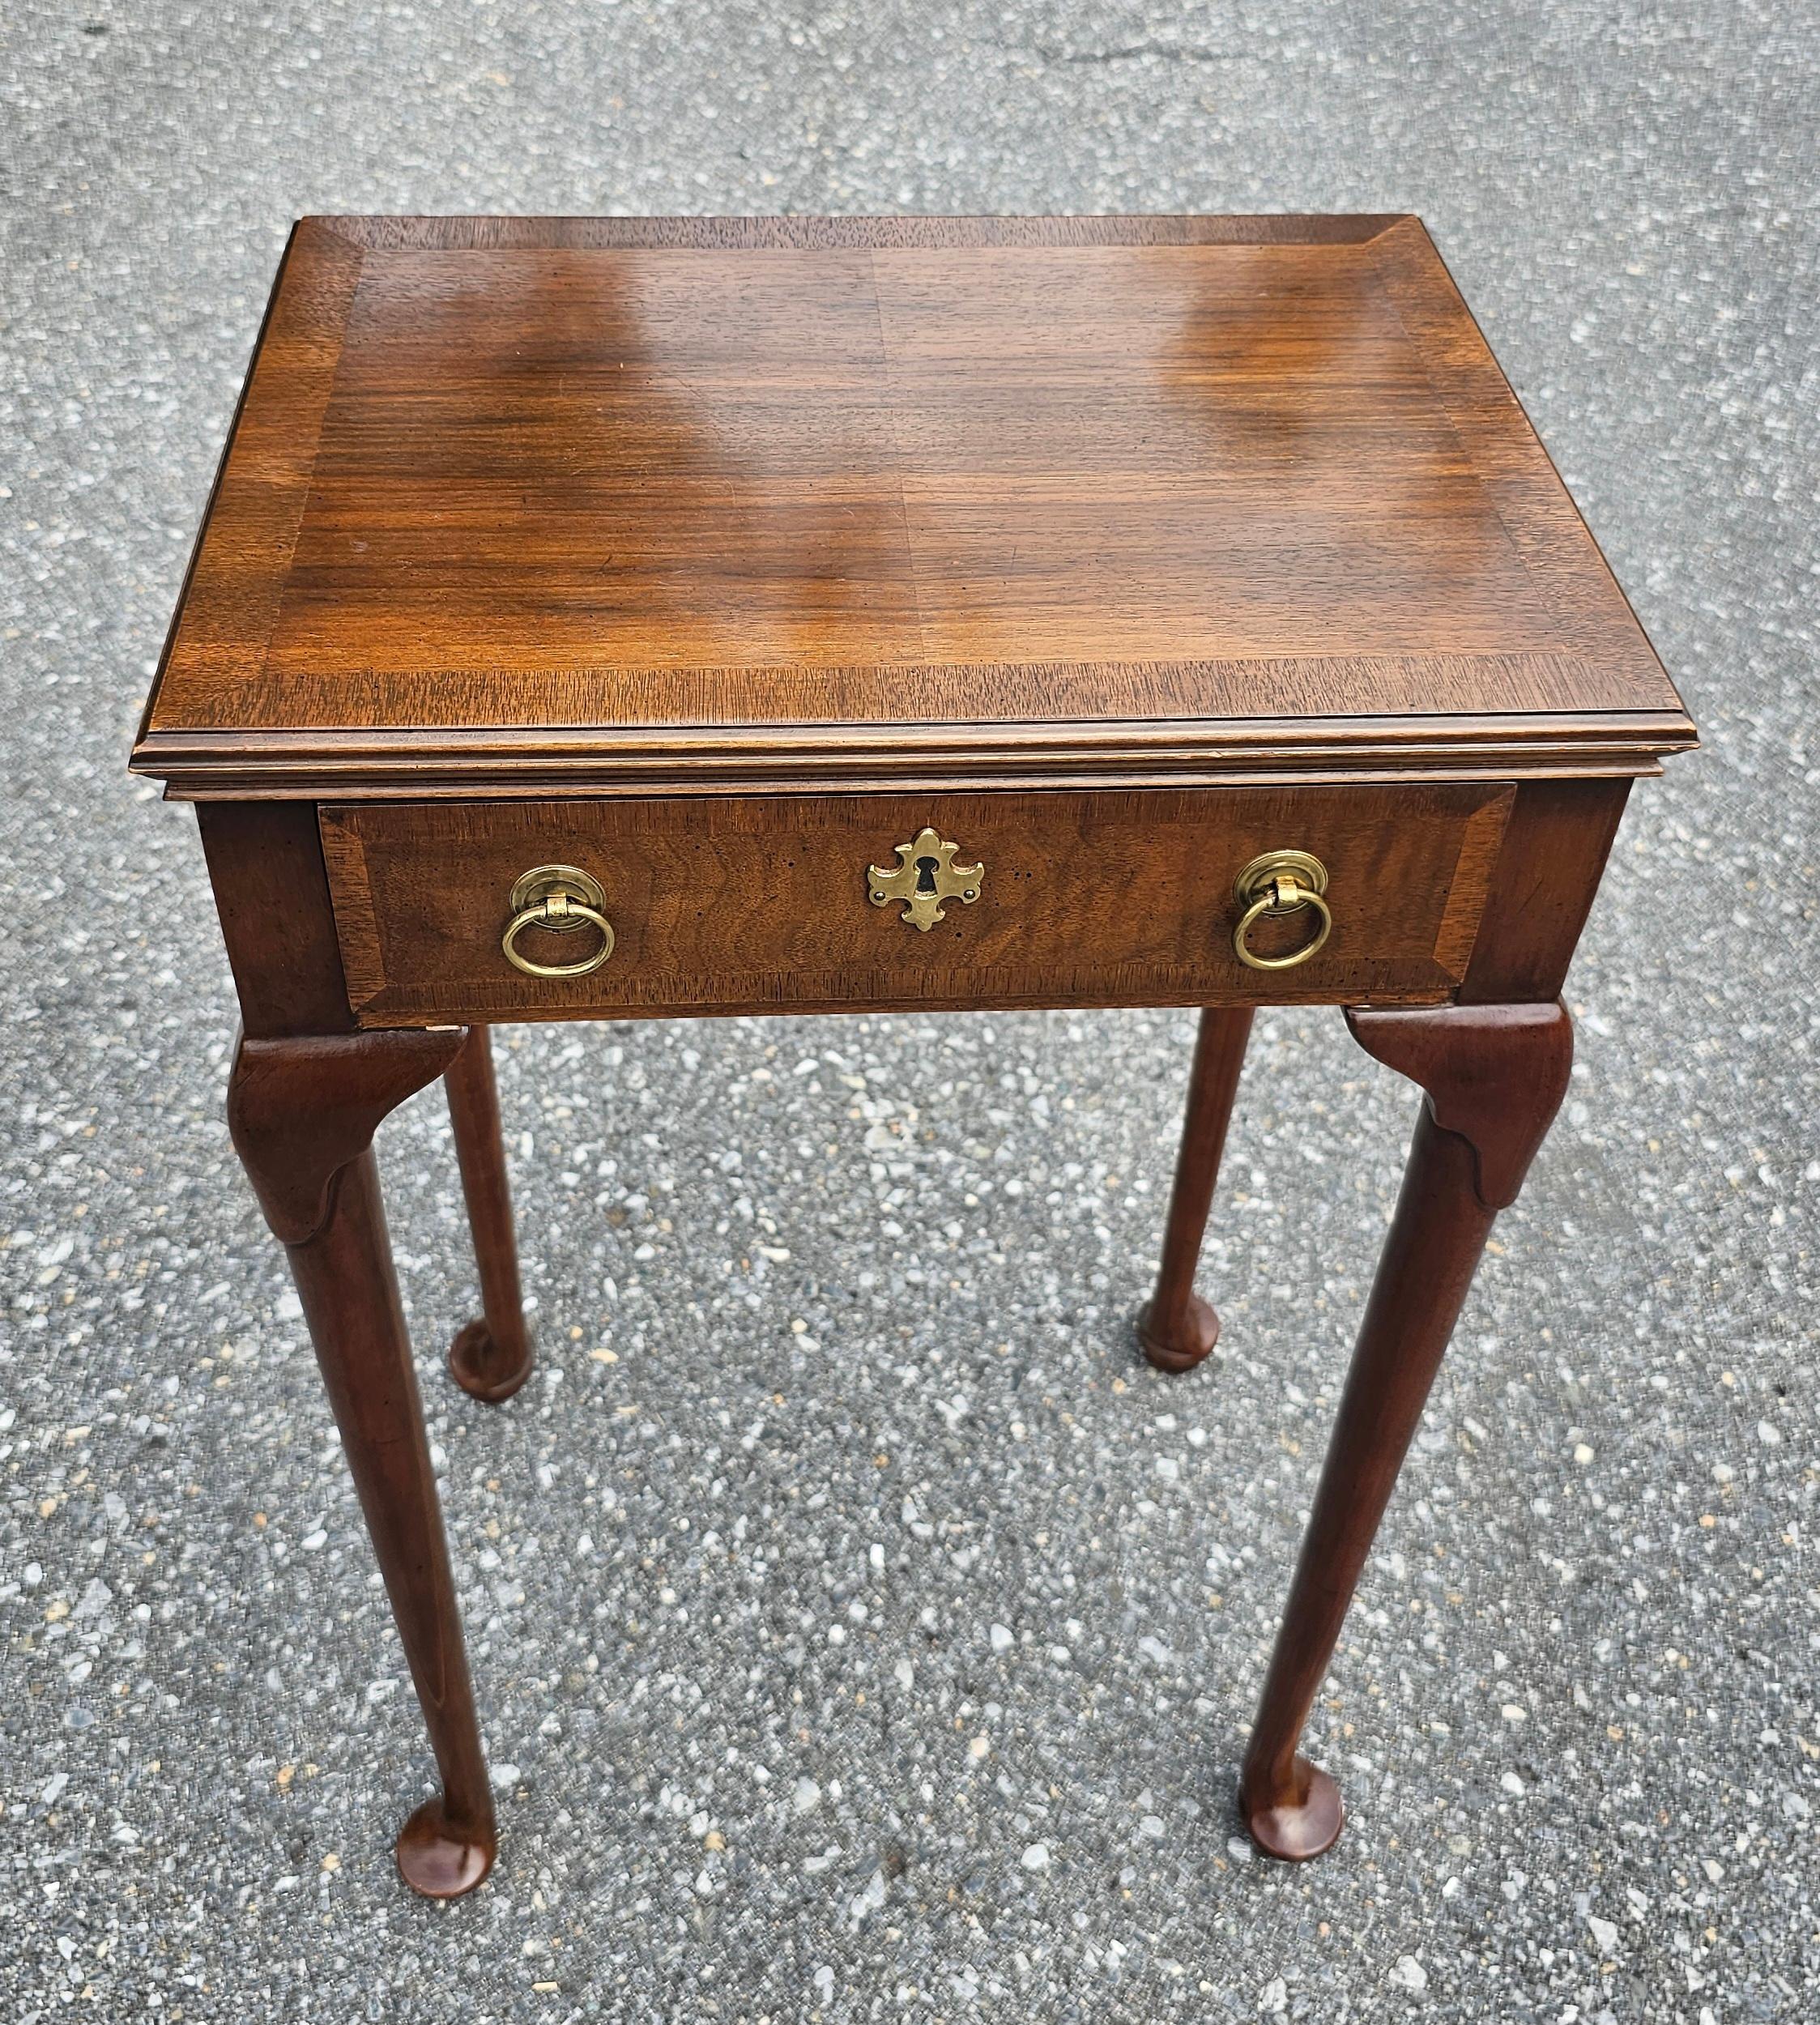 A slender Queen Anne Style Walnut high side Table in great vintage condition. Featire a single drawer with dovetail joins and with two pulls. Measure 16.75